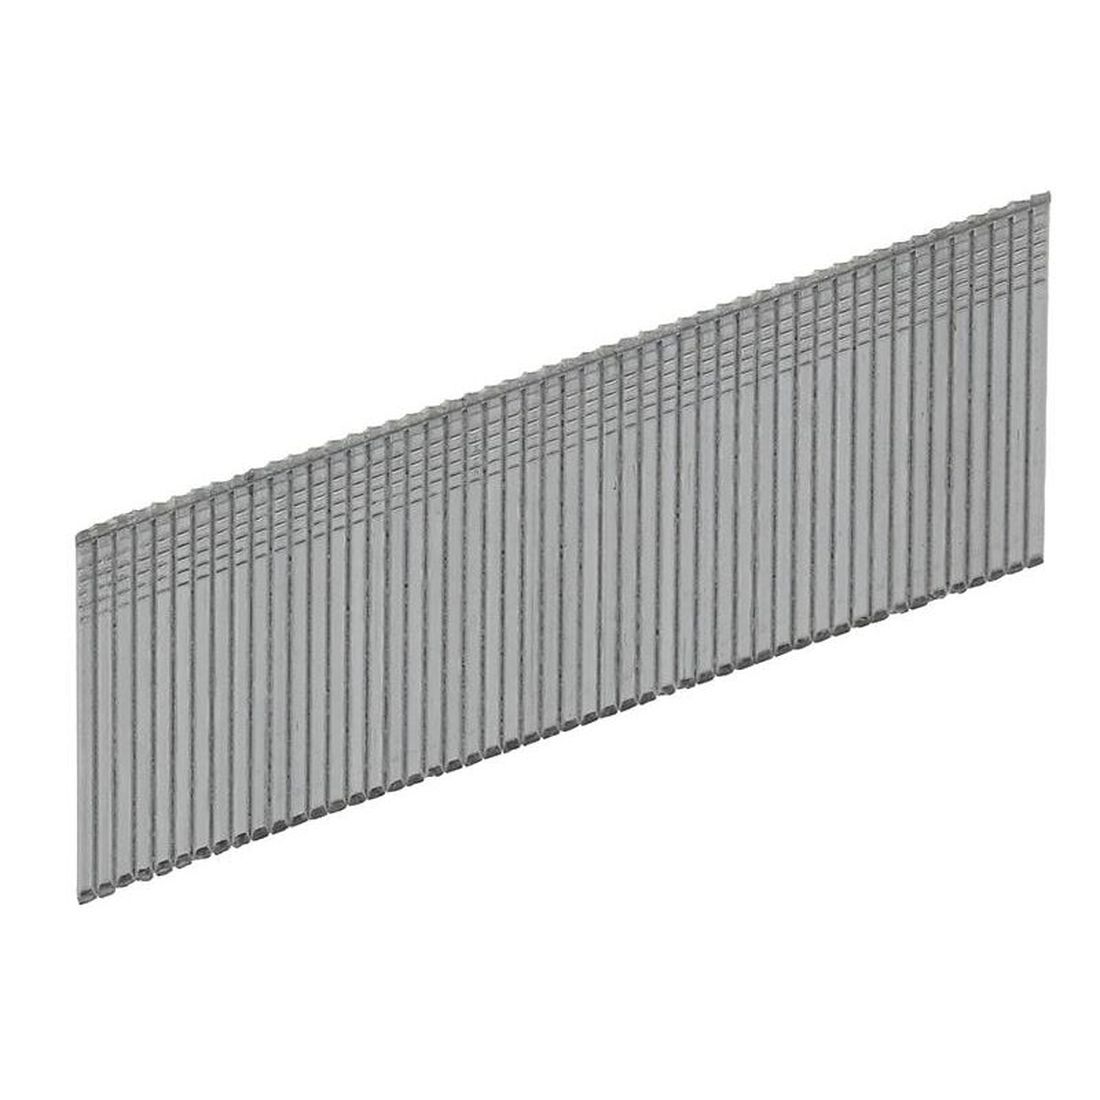 Paslode 51mm IM65a Galvanised Angled Brads Box of 2000 + 2 Fuel Cells                   